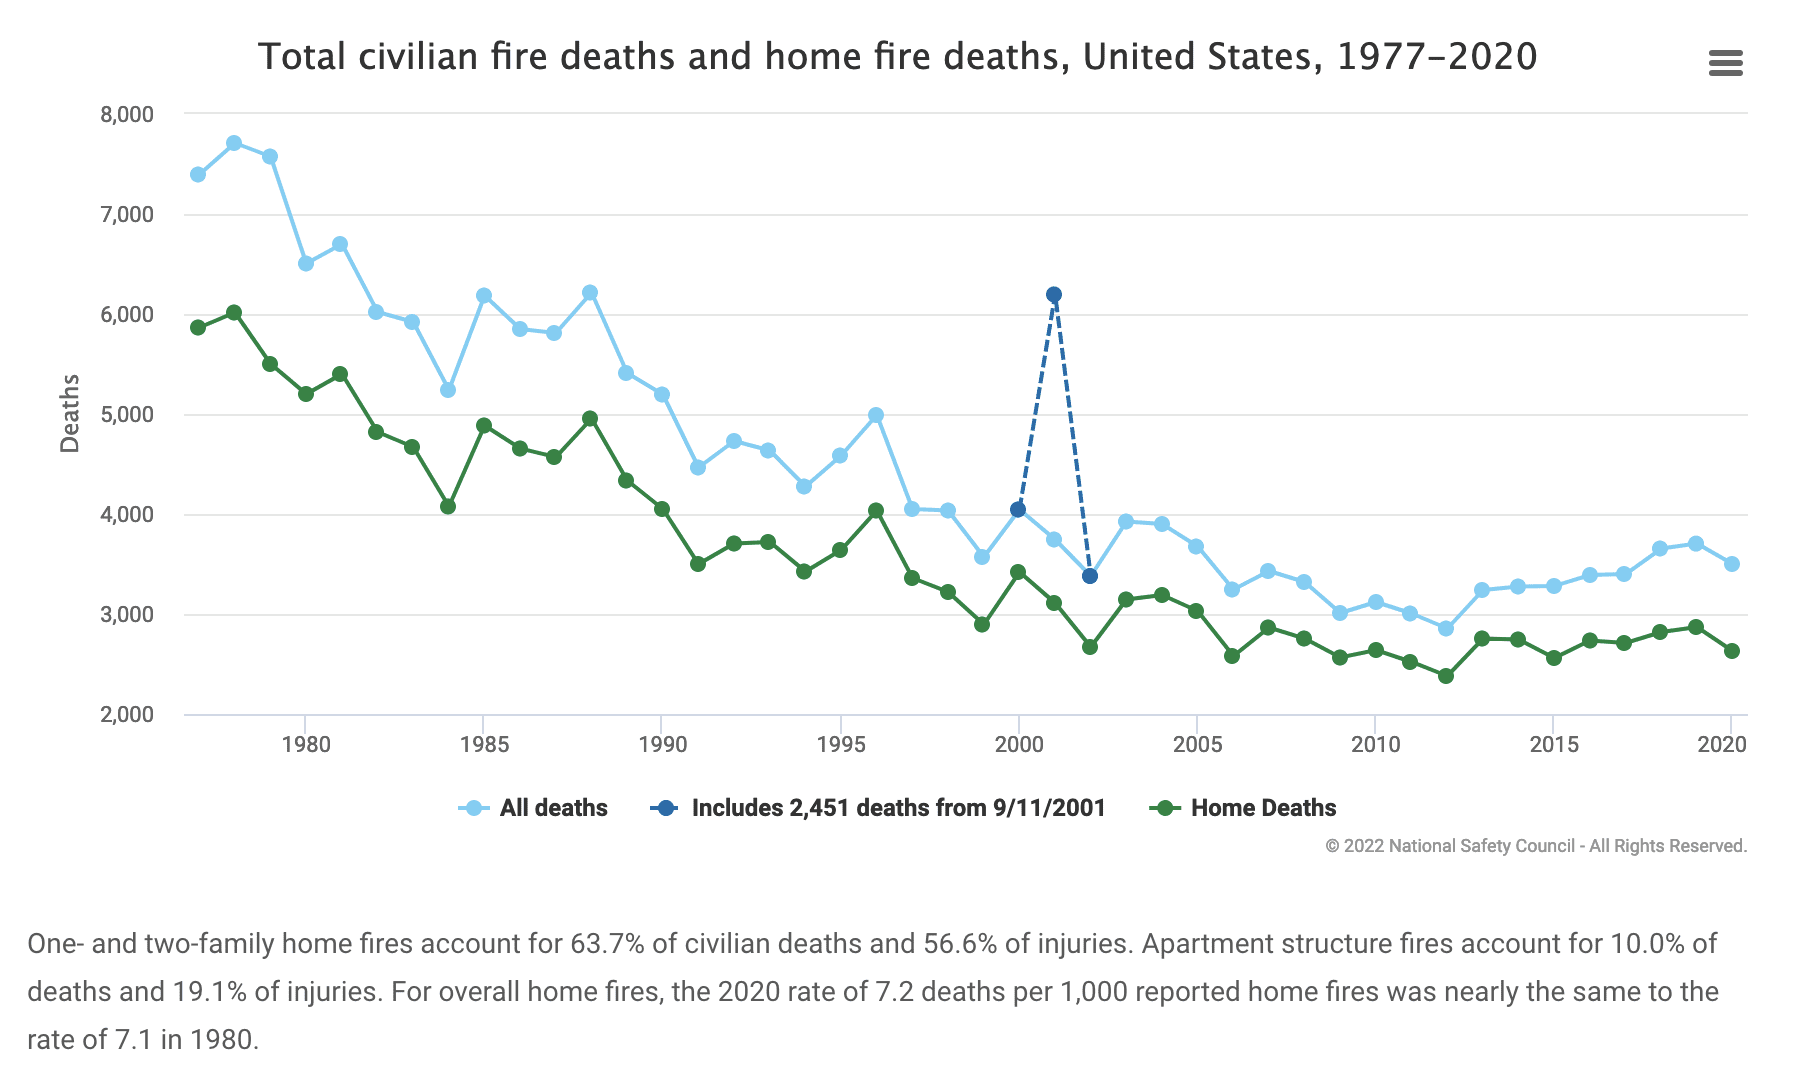 Decrease in USA Fire Deaths Over Time